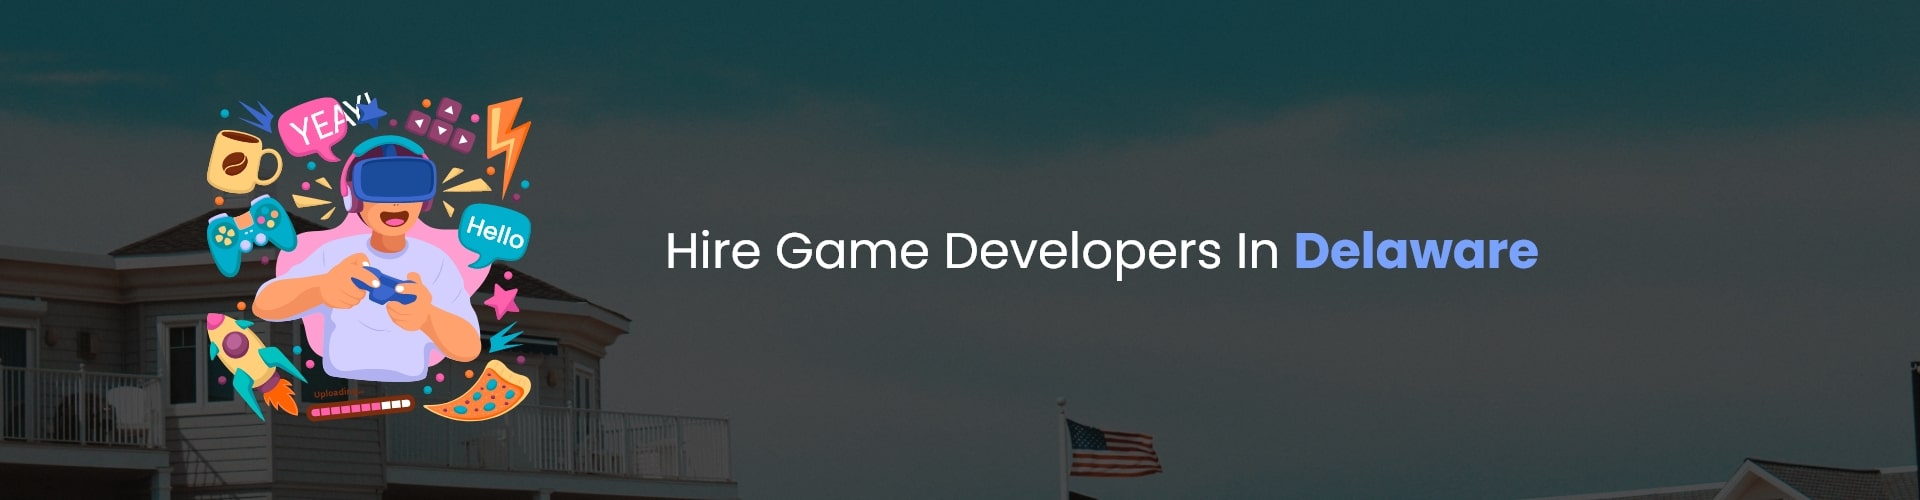 hire game developers in delaware